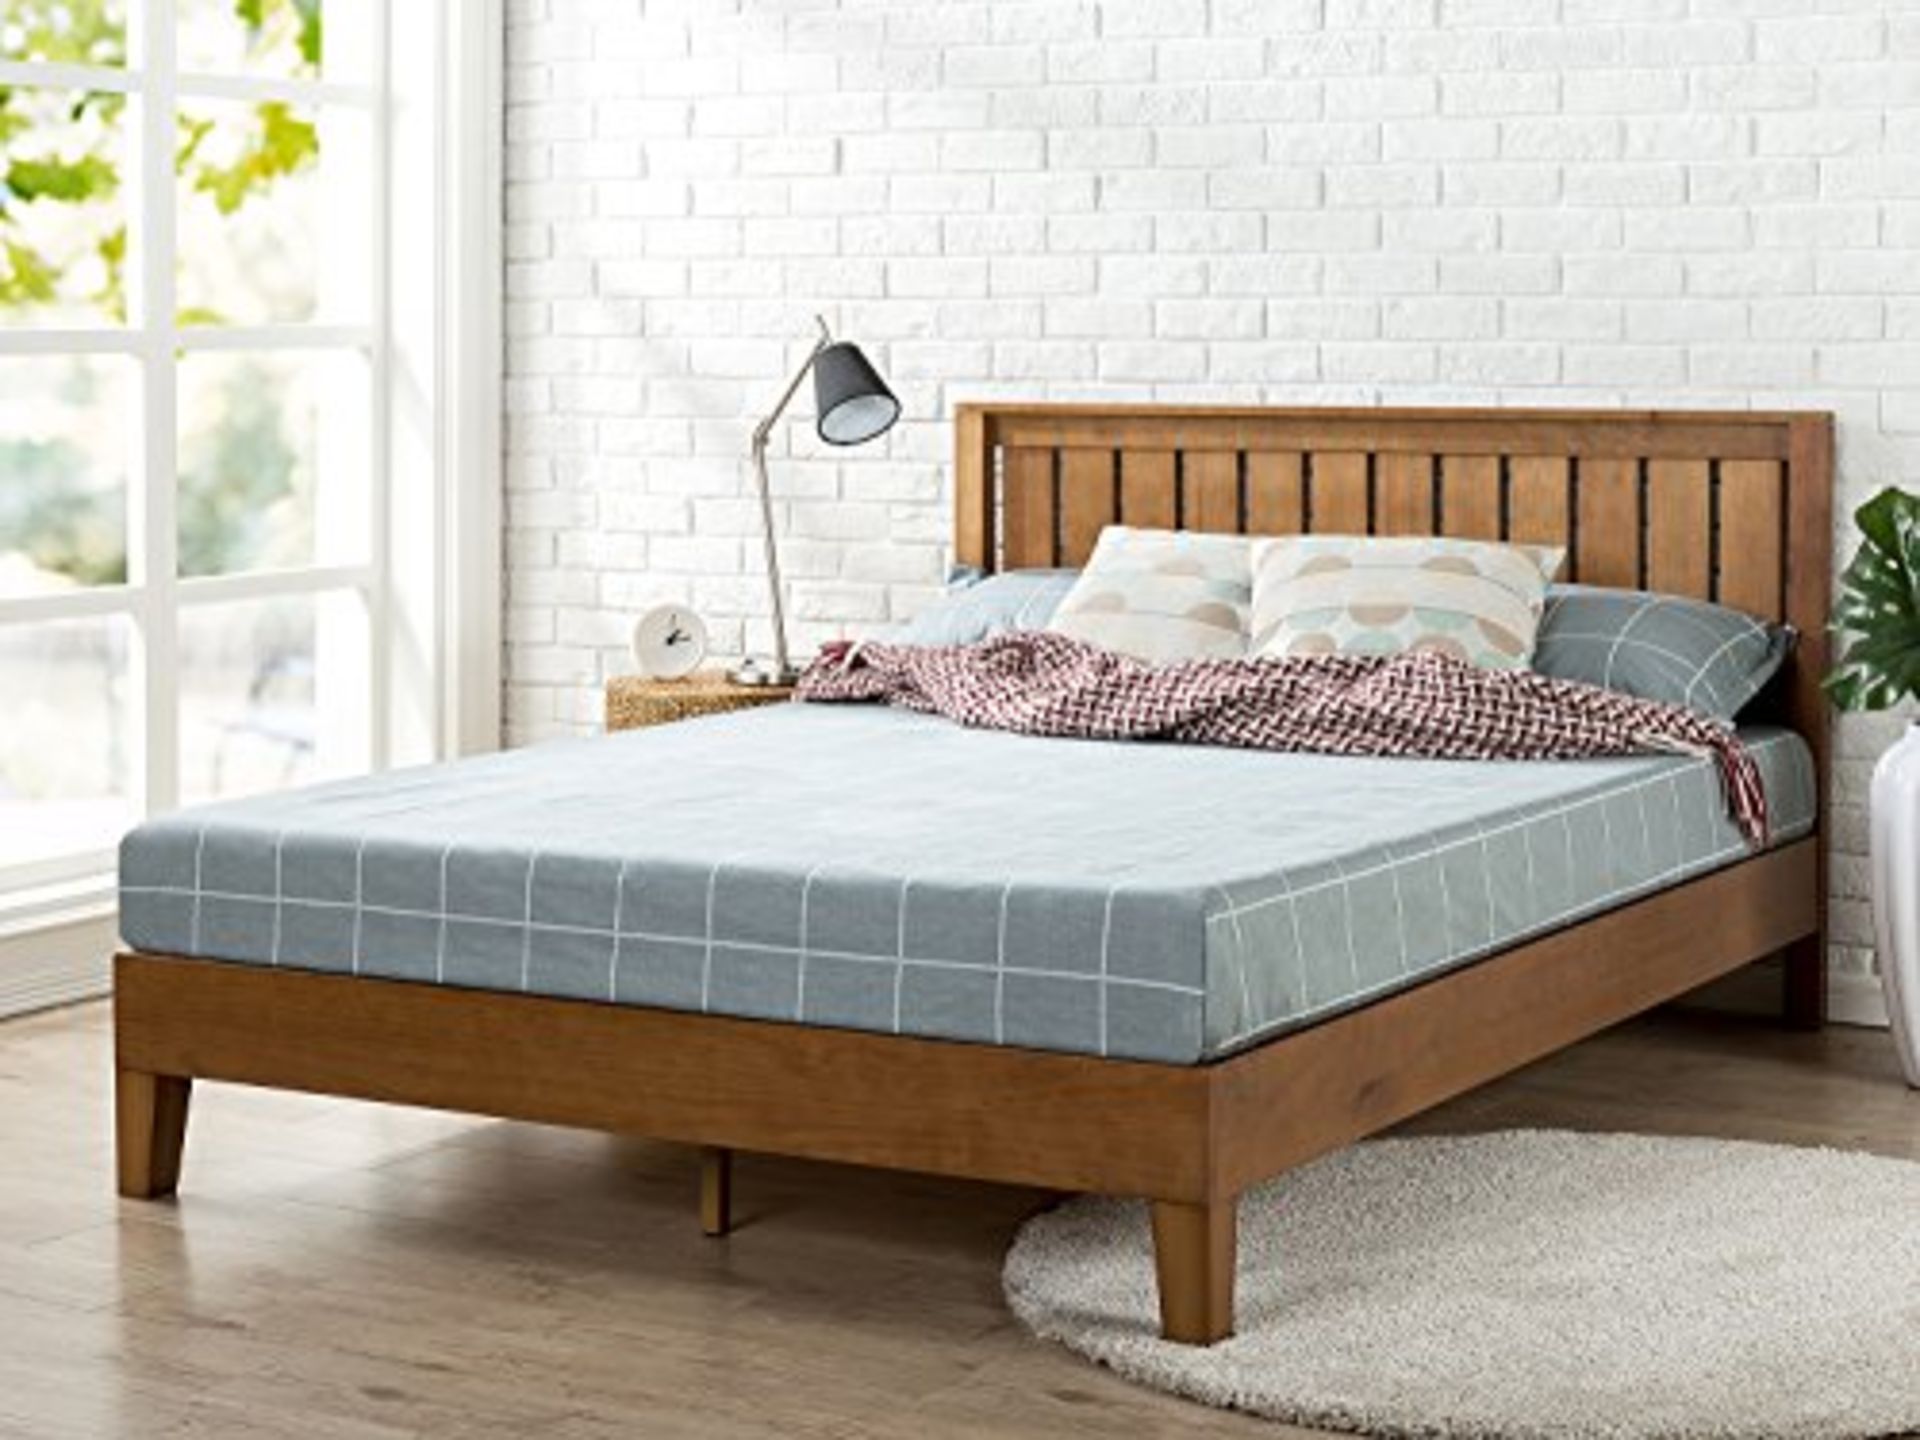 4ft 6 Double Zinus 12inch Solid Wood Platform Bed - Image 2 of 2